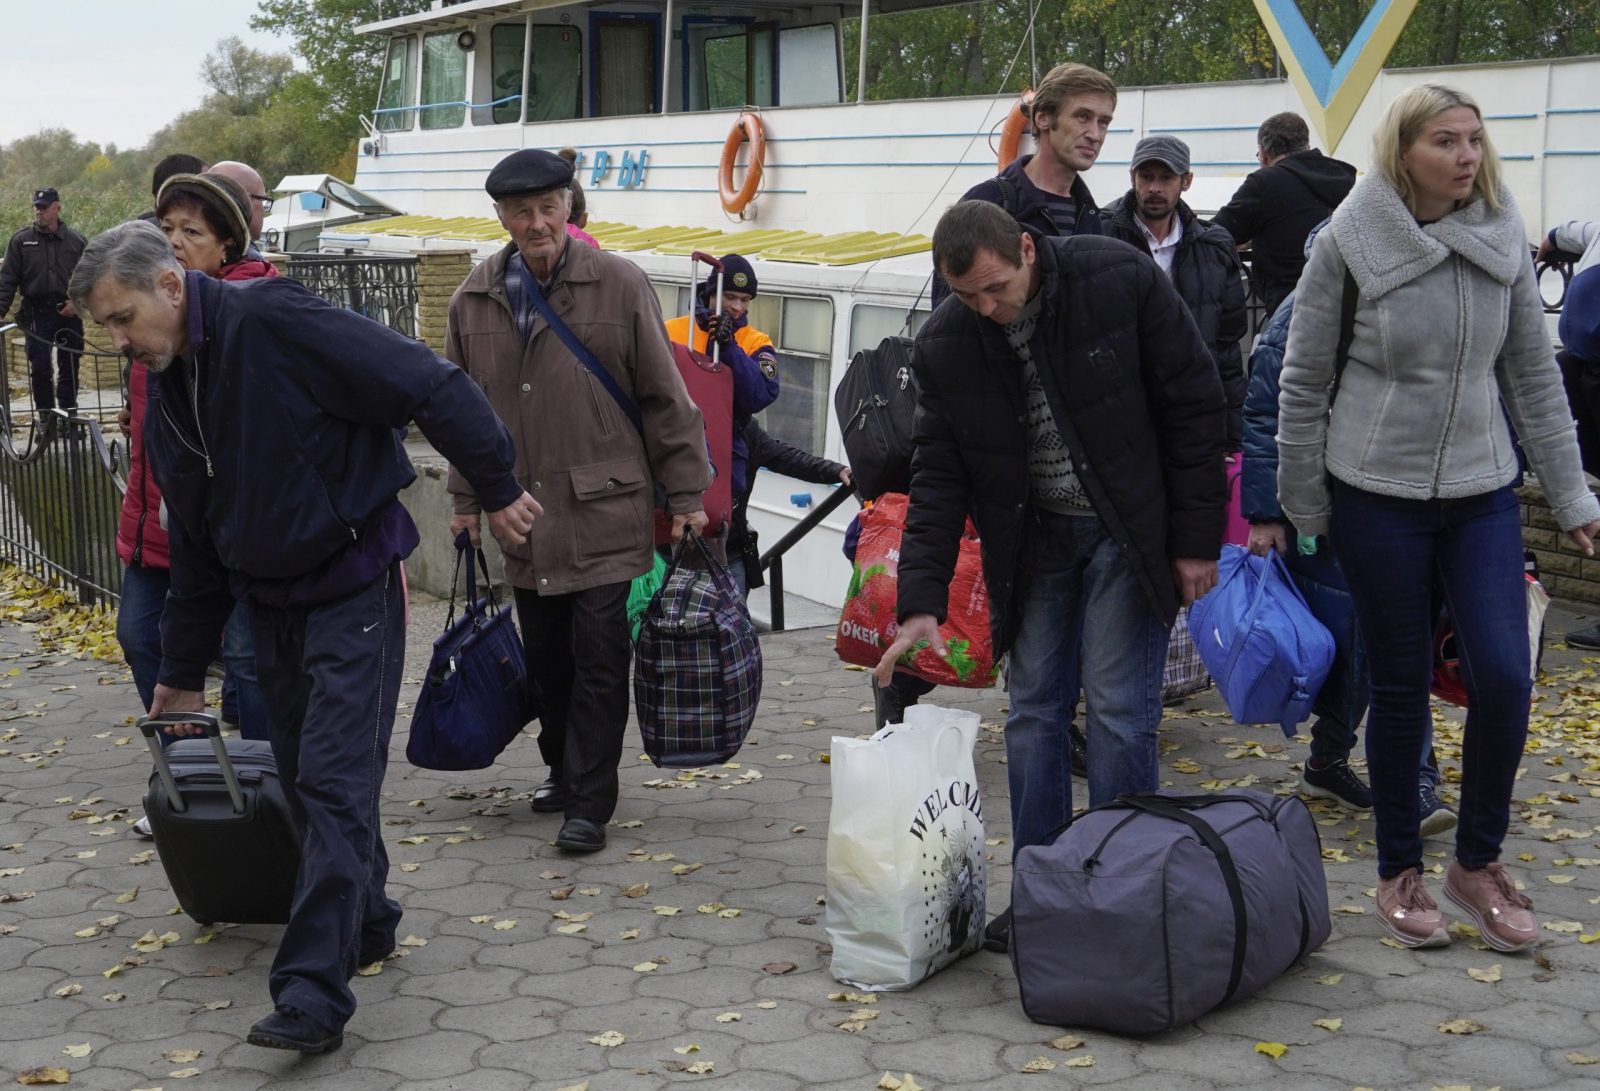 epa10265062 Kherson residents evacuated from Kherson carry luggage after their arrival to Oleshky, Kherson region, Ukraine, 25 October 2022. The authorities of the Kherson region announced the mass displacement of residents of several municipalities, including the city of Kherson, to the left bank of the Dnieper. According to the Acting Governor of the region Vladimir Saldo, this is necessary because of the increased frequency of attacks by the Armed Forces of Ukraine, as well as in connection with the threat of flooding of the territories due to the possible destruction of the dam of the Kakhovskaya hydroelectric power station. According to the deputy head of the regional administration Kirill Stremousov, about 32,000 people were transported to the other side of the Dnipro river.  EPA/STRINGER